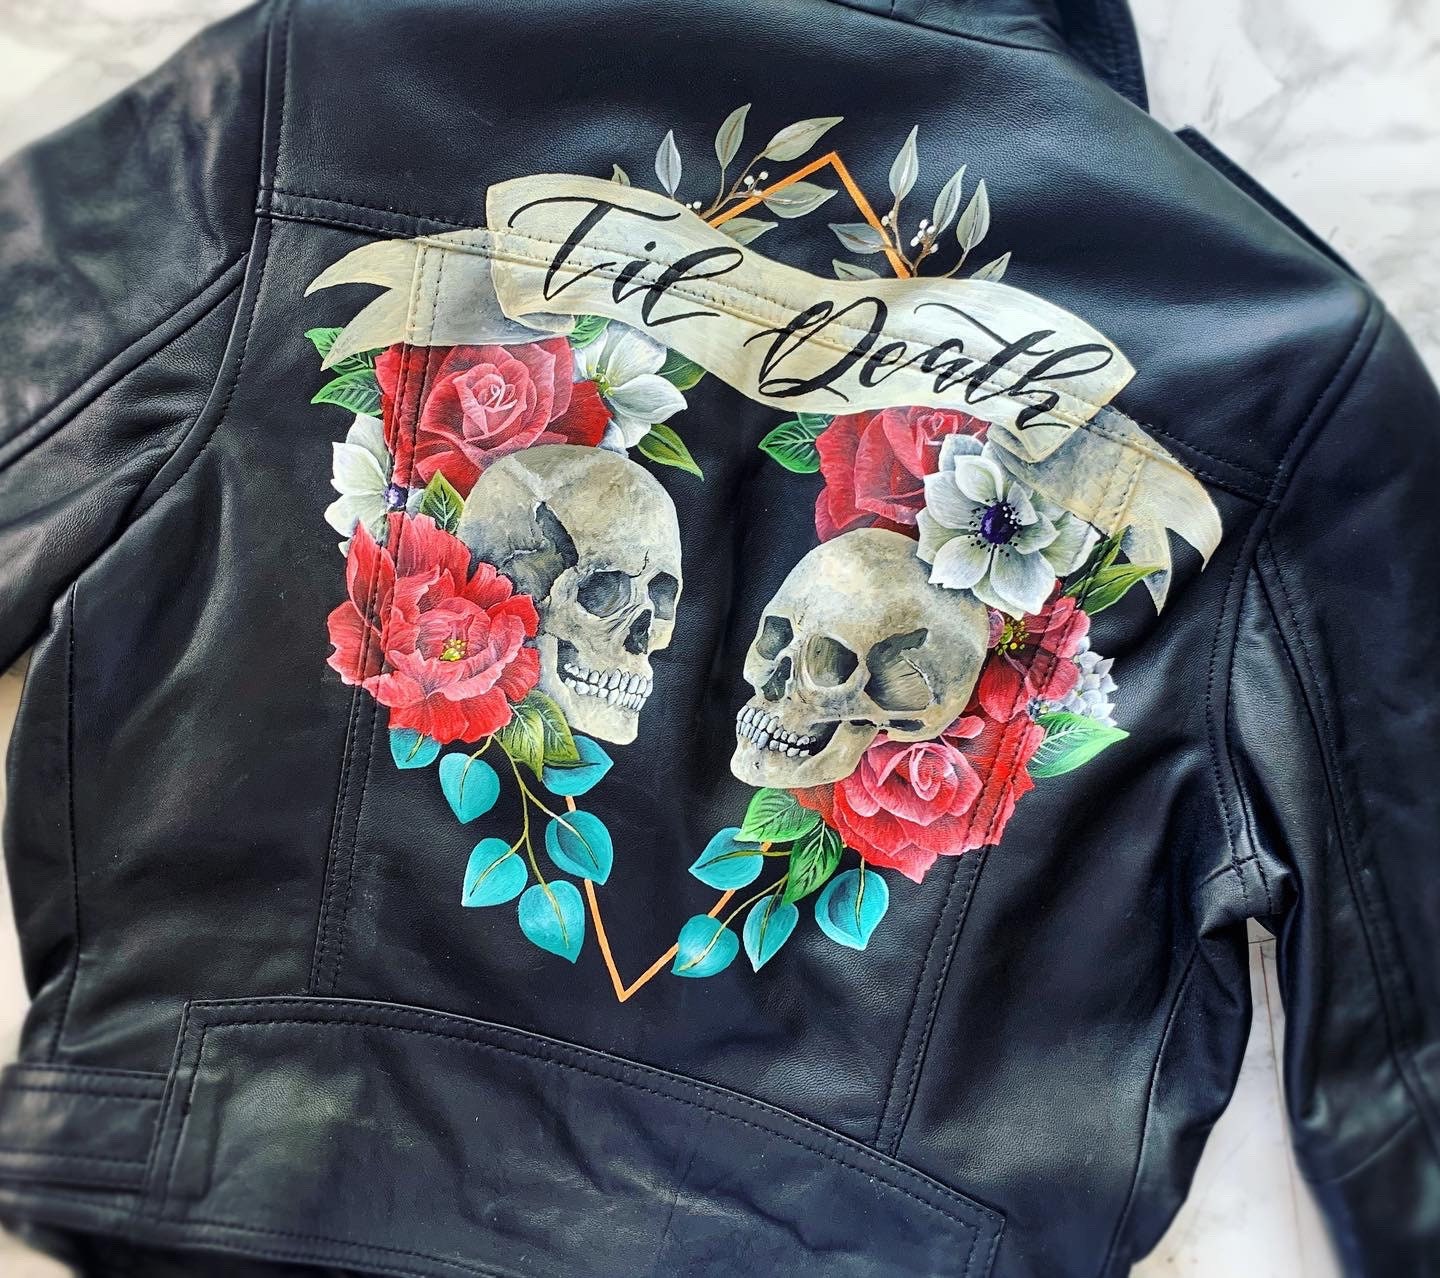 Hand Painted Leather Jacket. Personalised Leather Jacket. Skull design. Painting only